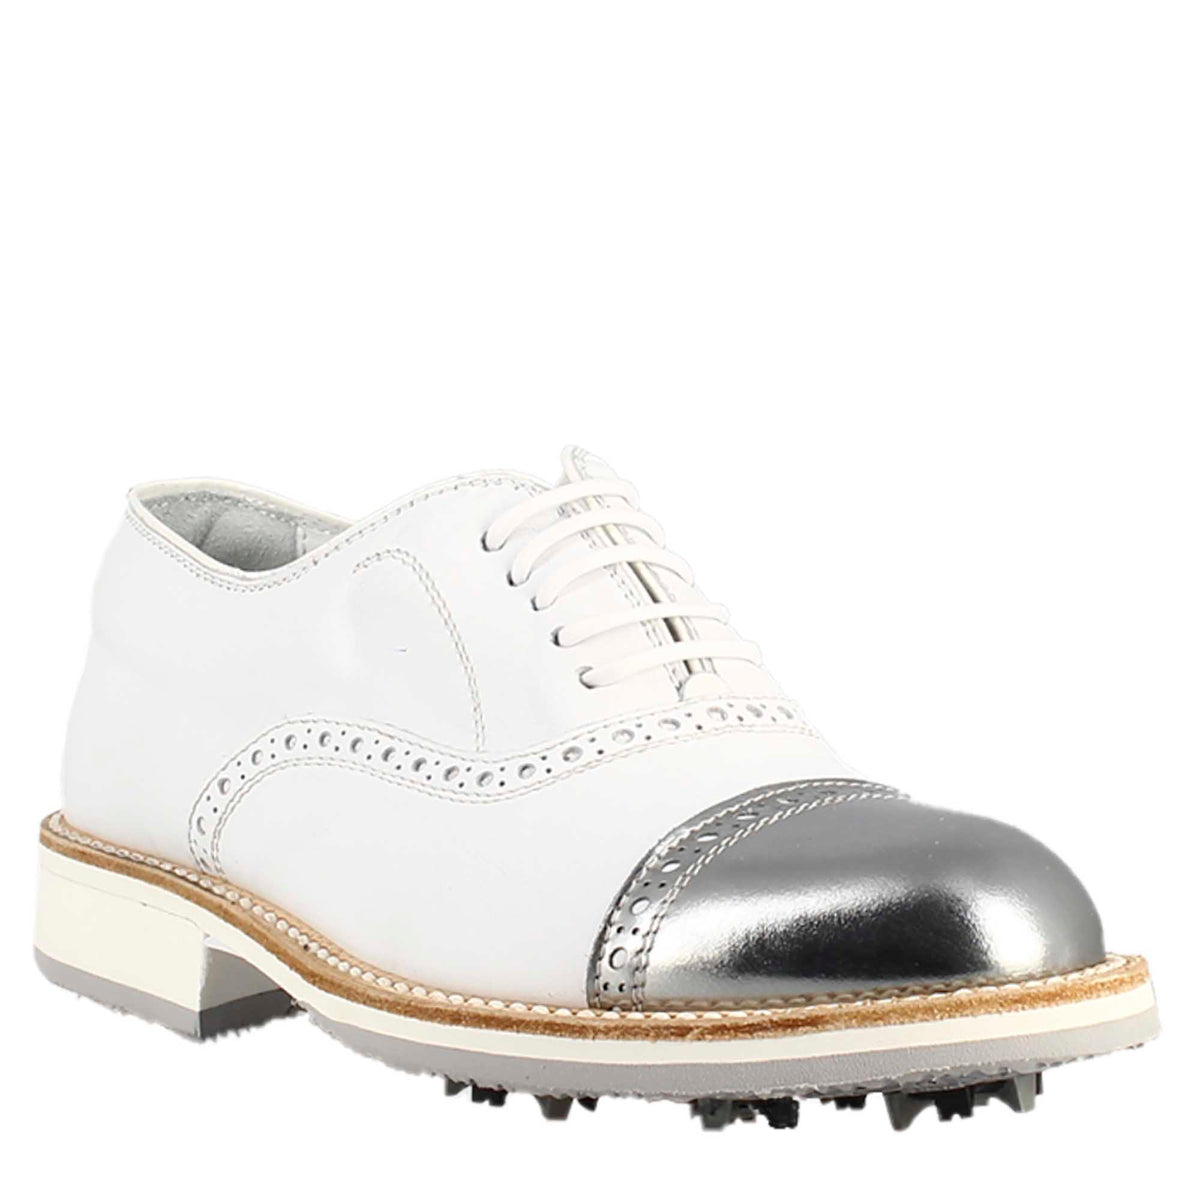 Handcrafted men's golf shoes in white leather and silver detailing